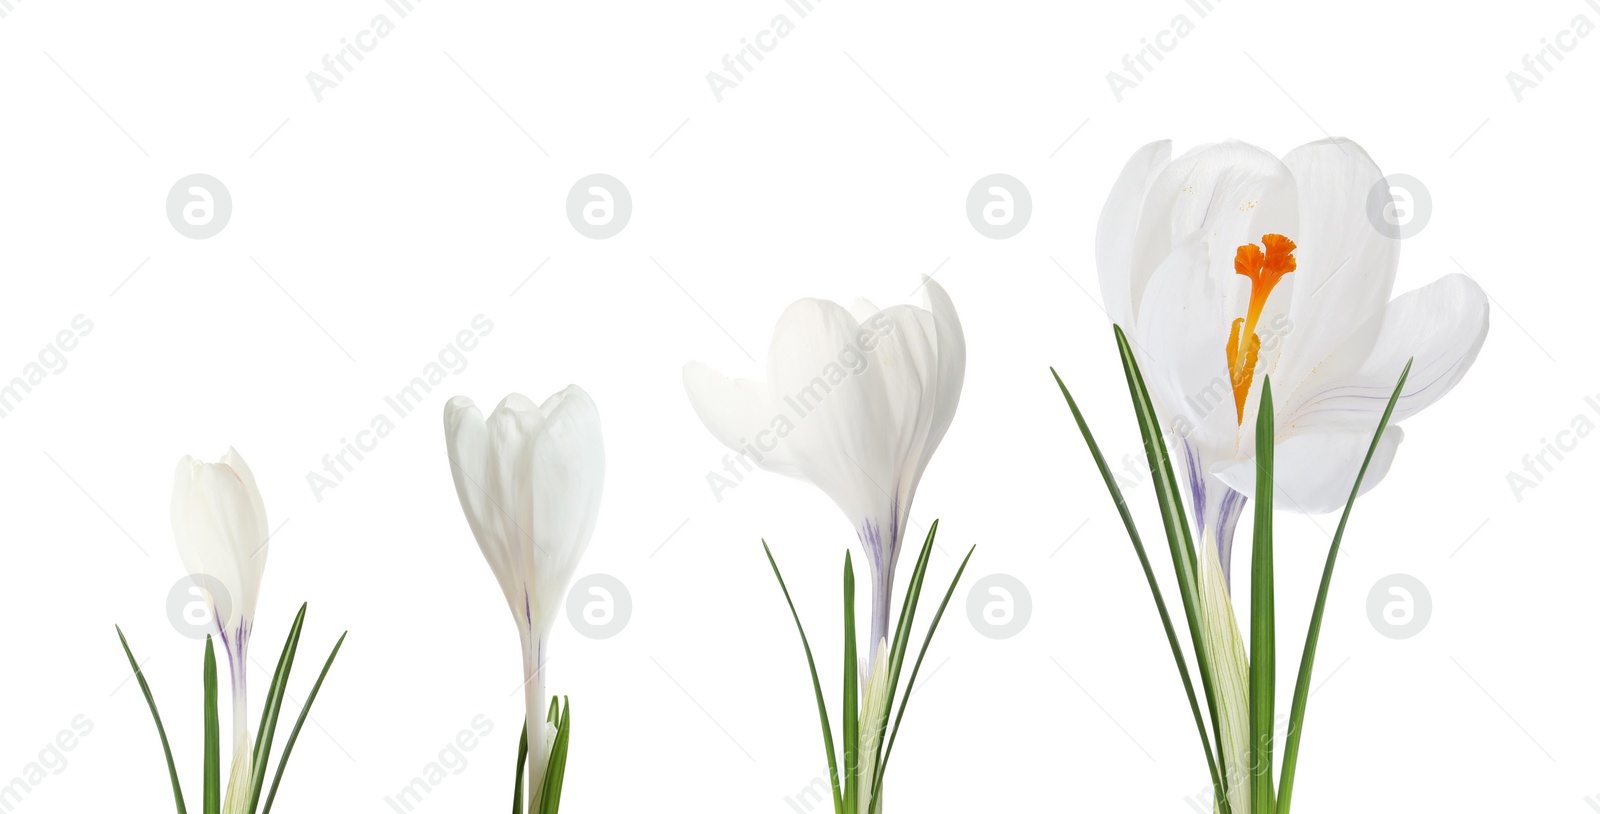 Image of Beautiful spring crocus flowers on white background, banner design. Stages of growth